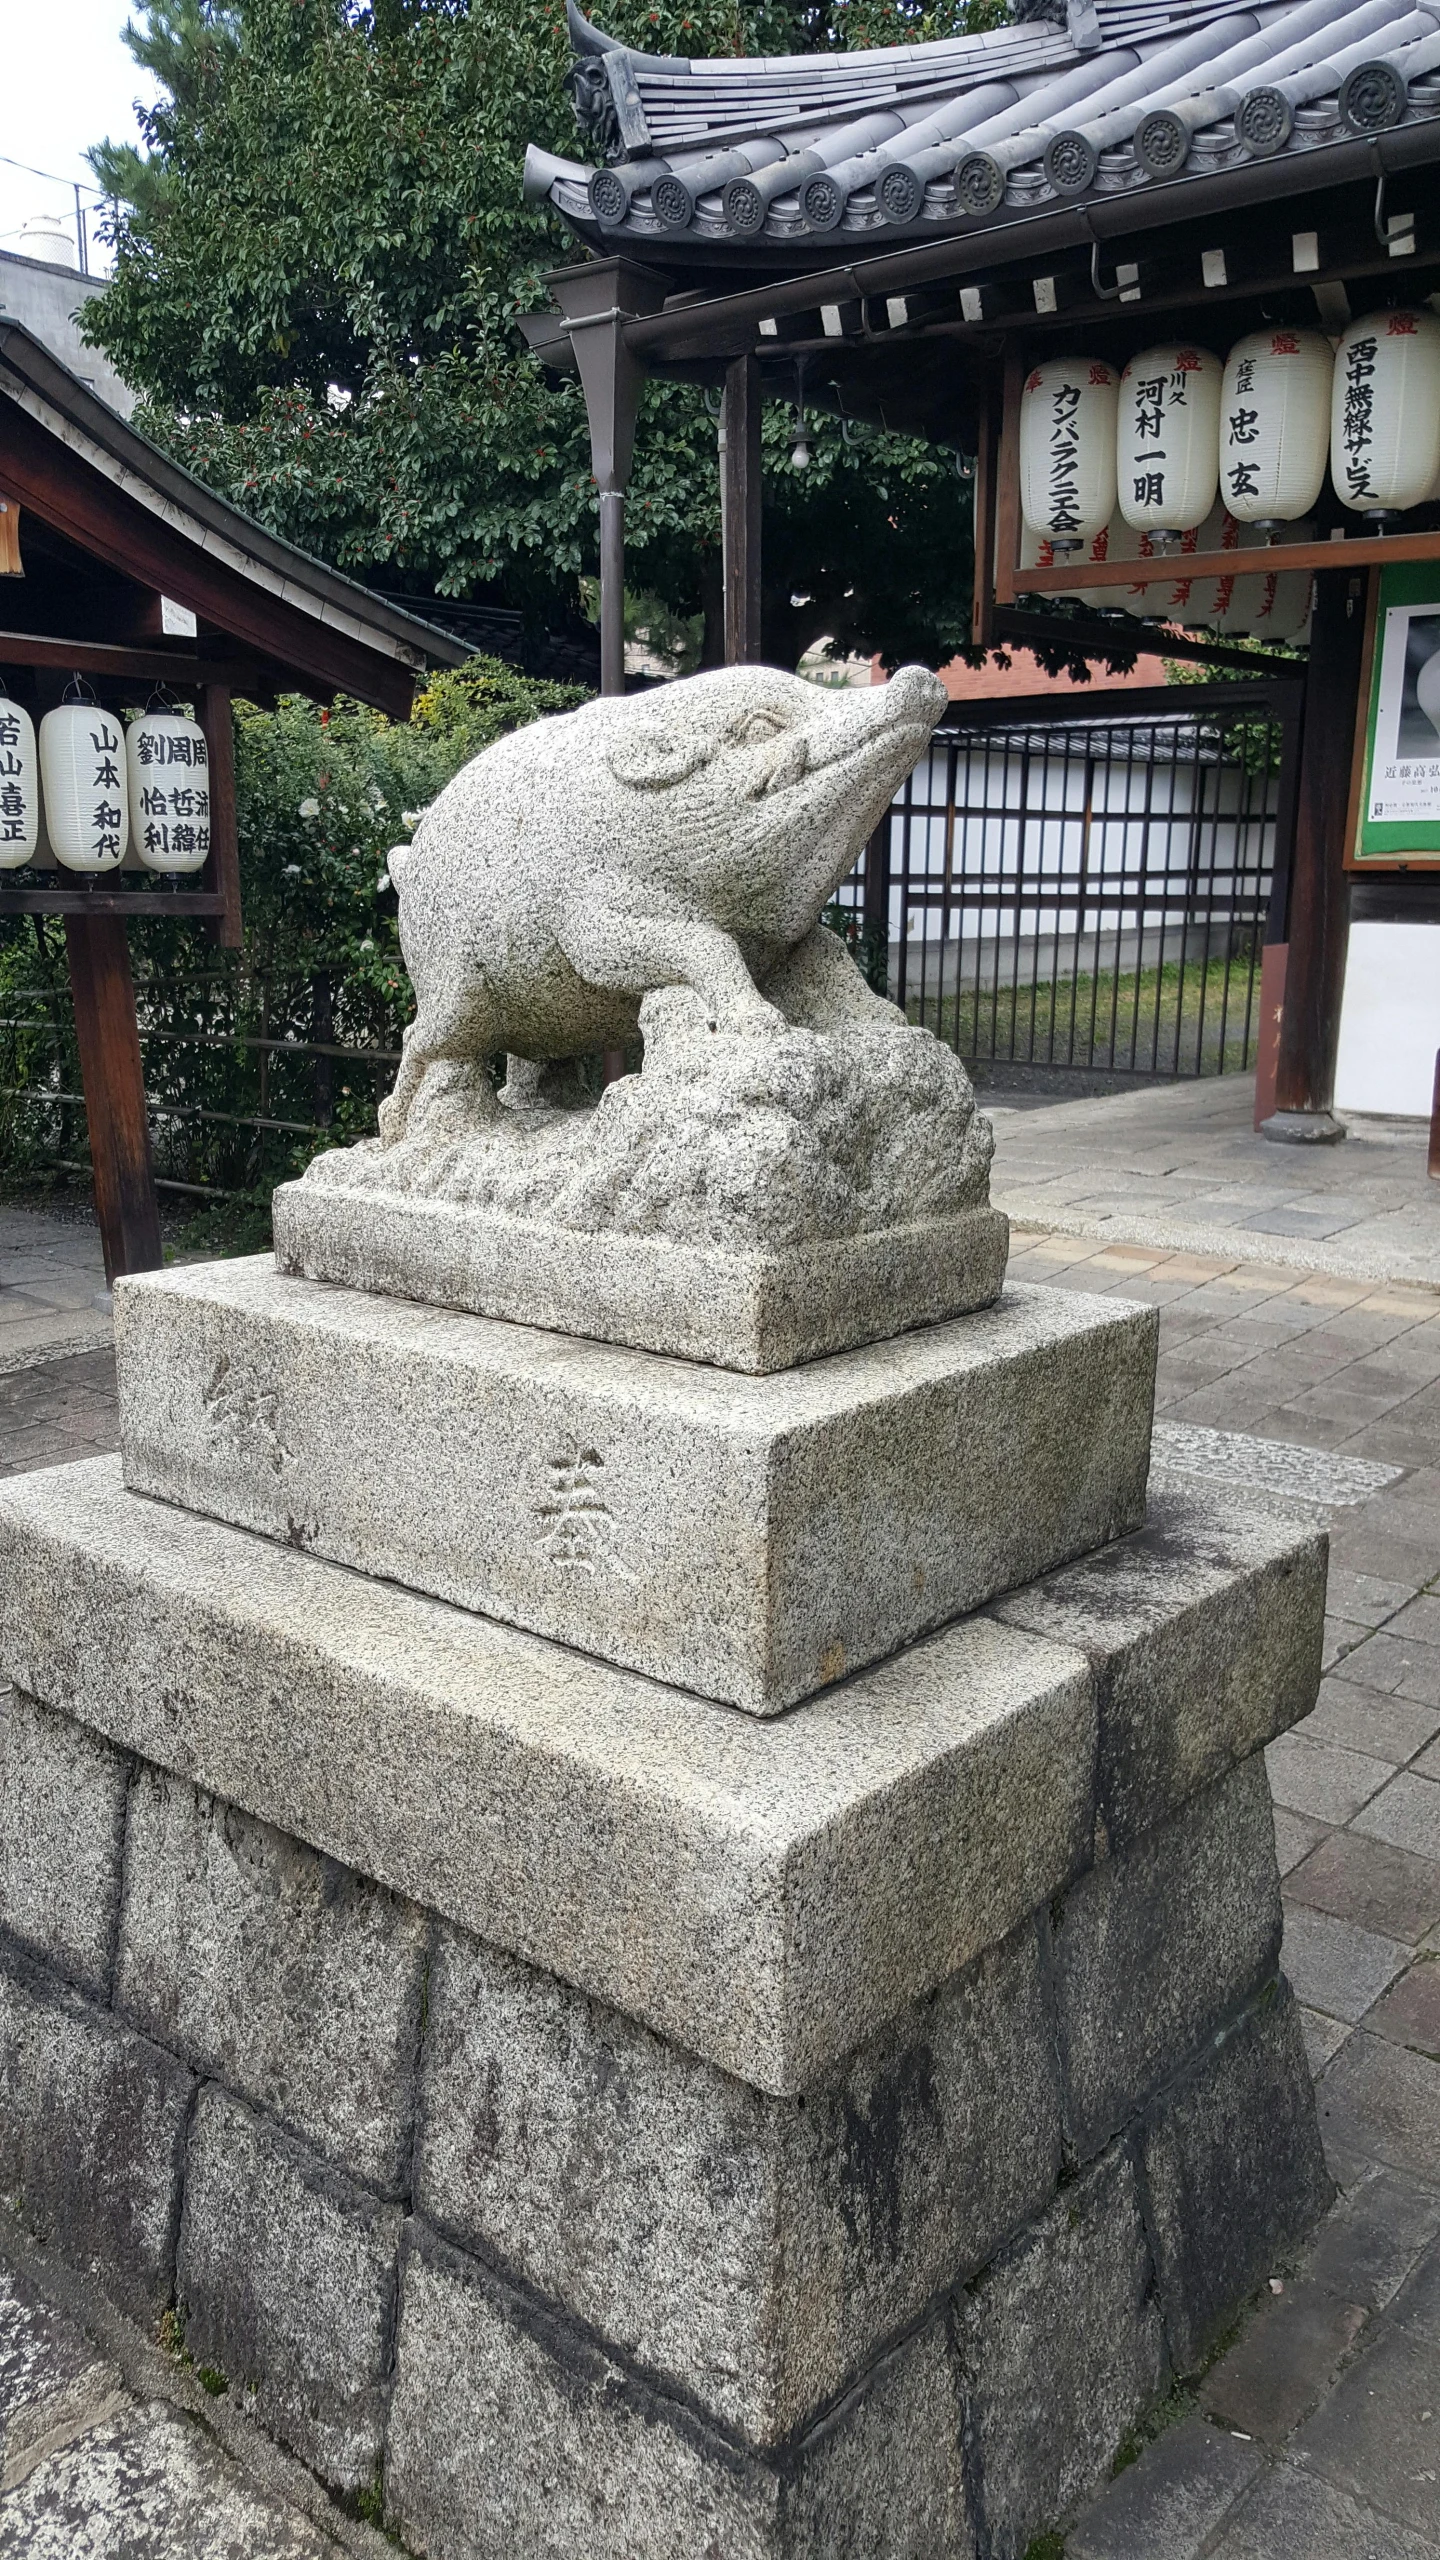 a statue of a frog sitting on top of a stone block, inspired by Takeuchi Seihō, けもの, square, japan sightseeing, image